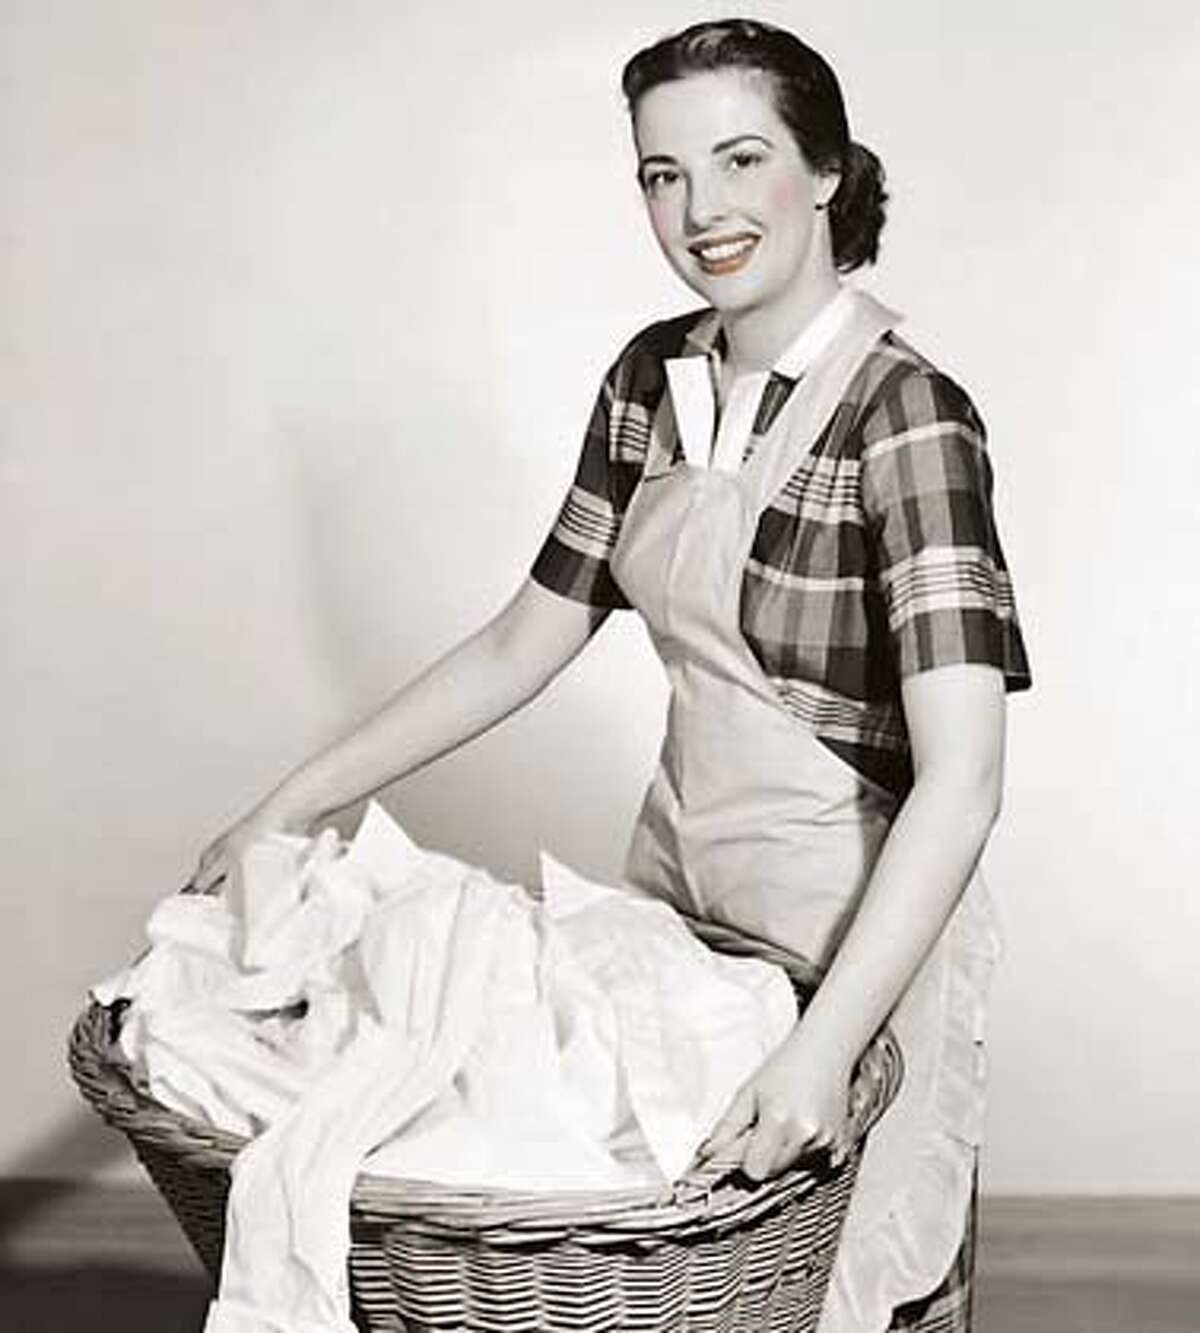 Ironing evokes mom who liked things orderly.